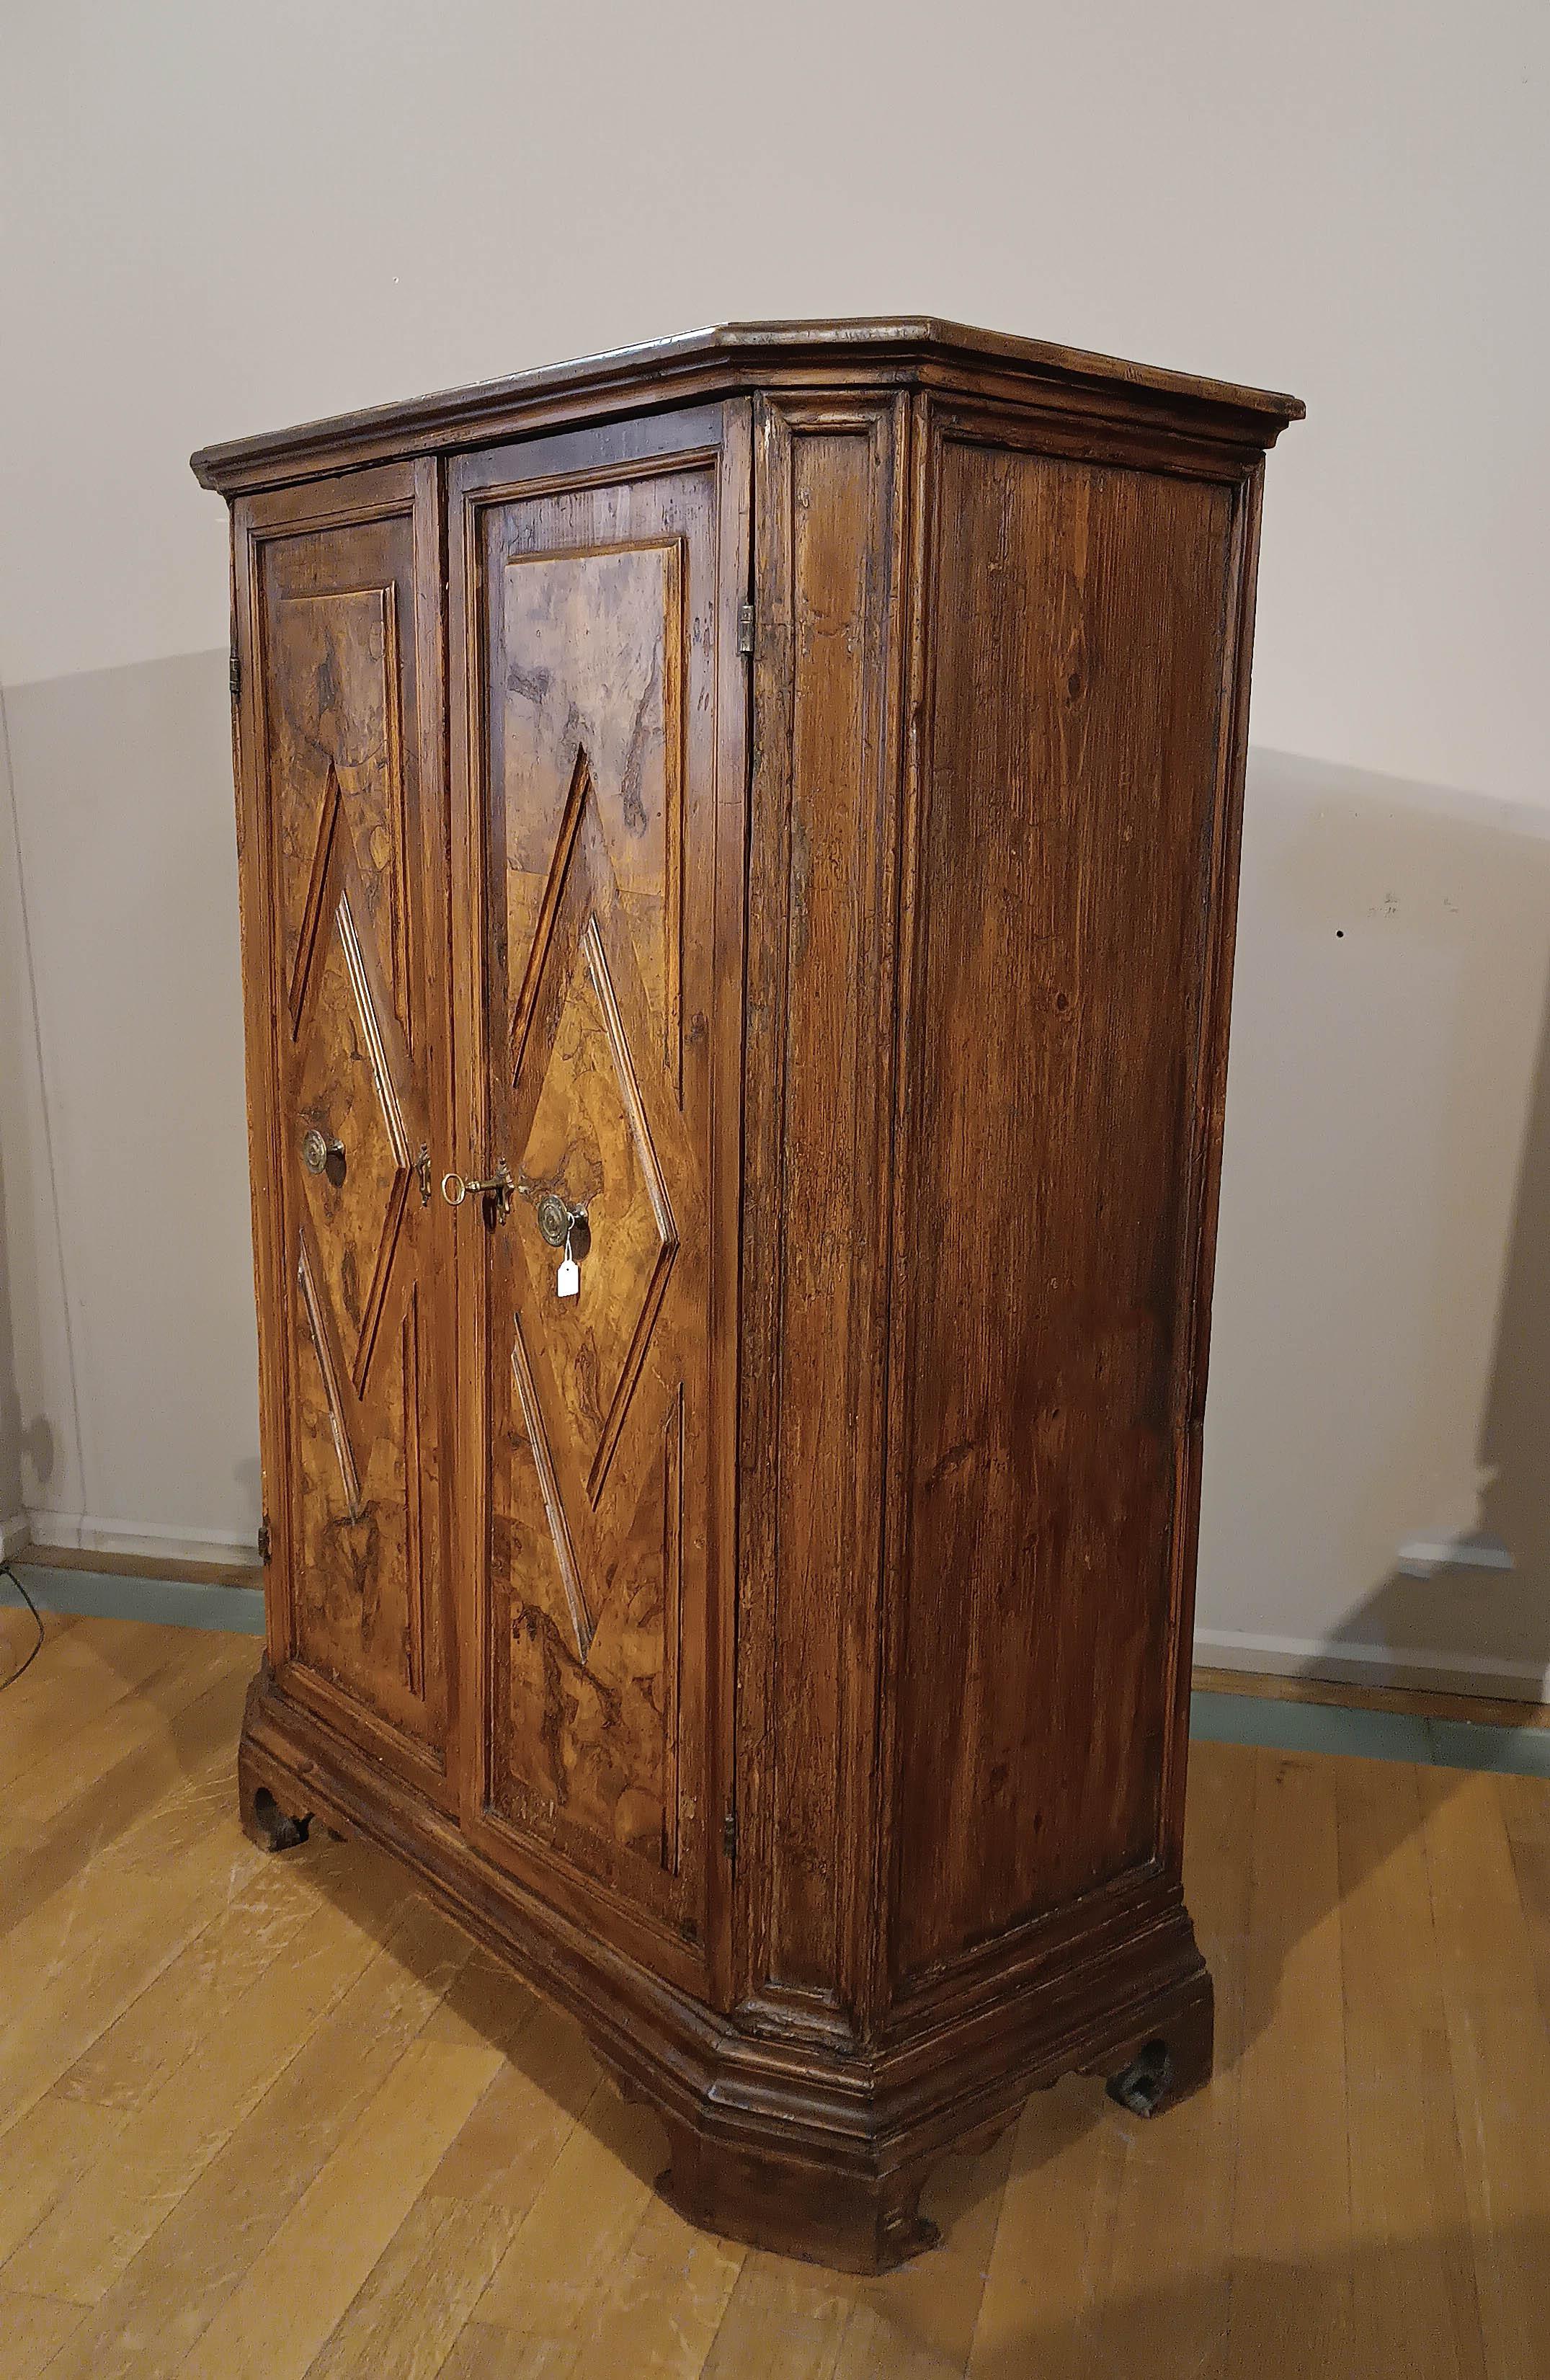 SECOND HALF OF THE 18th CENTURY WALNUT BRIAR CABINET  In Good Condition For Sale In Firenze, FI